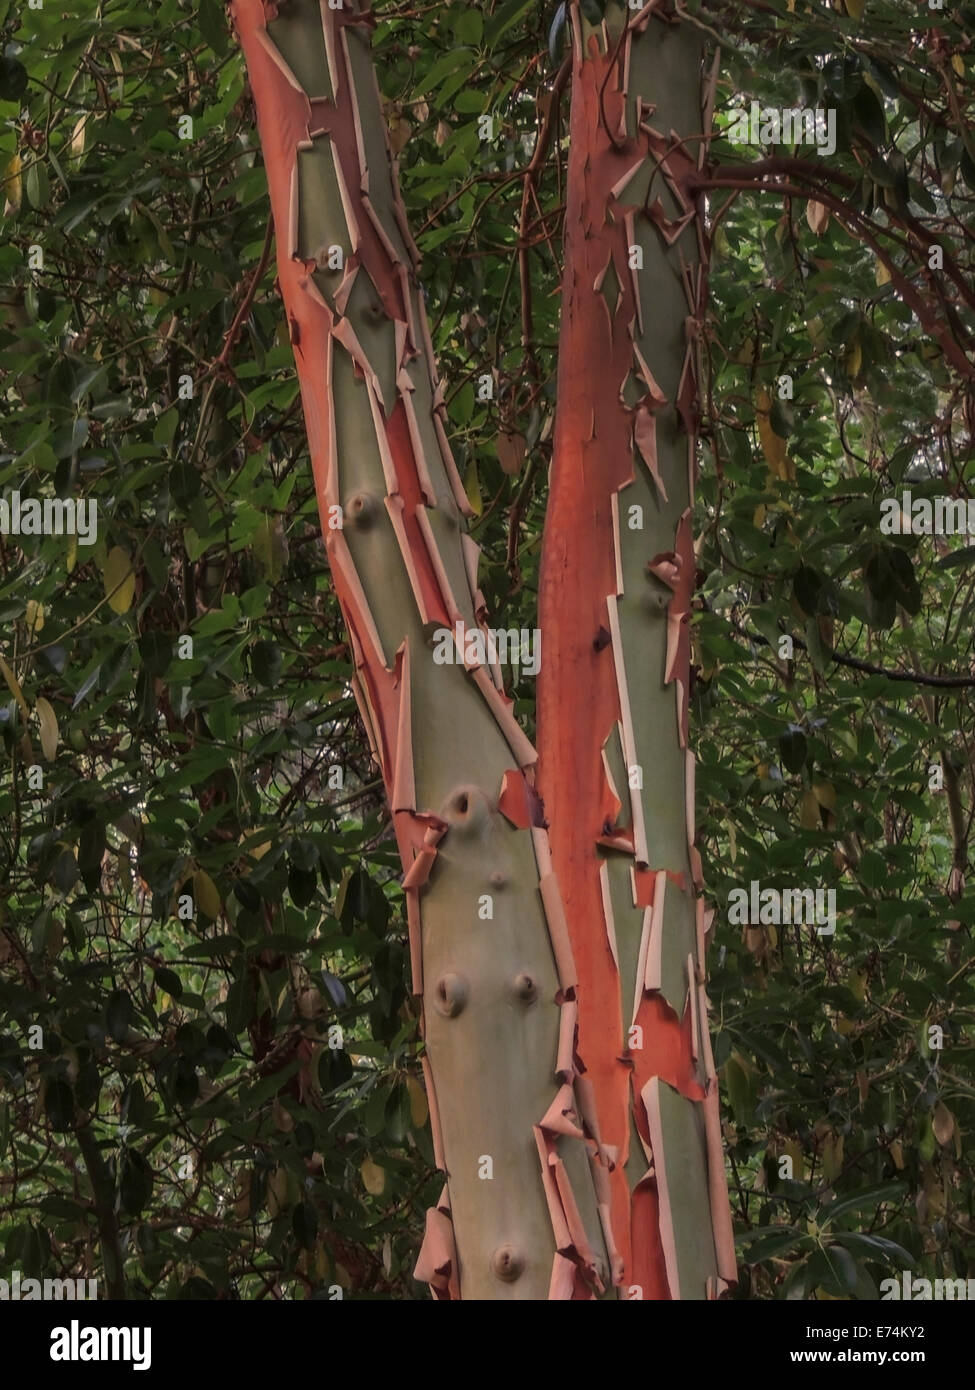 Madrone tree (Arbutus menziesii) an evergreen tree with orange-red bark  that peels away naturally in thin sheets. Native to coas Stock Photo - Alamy